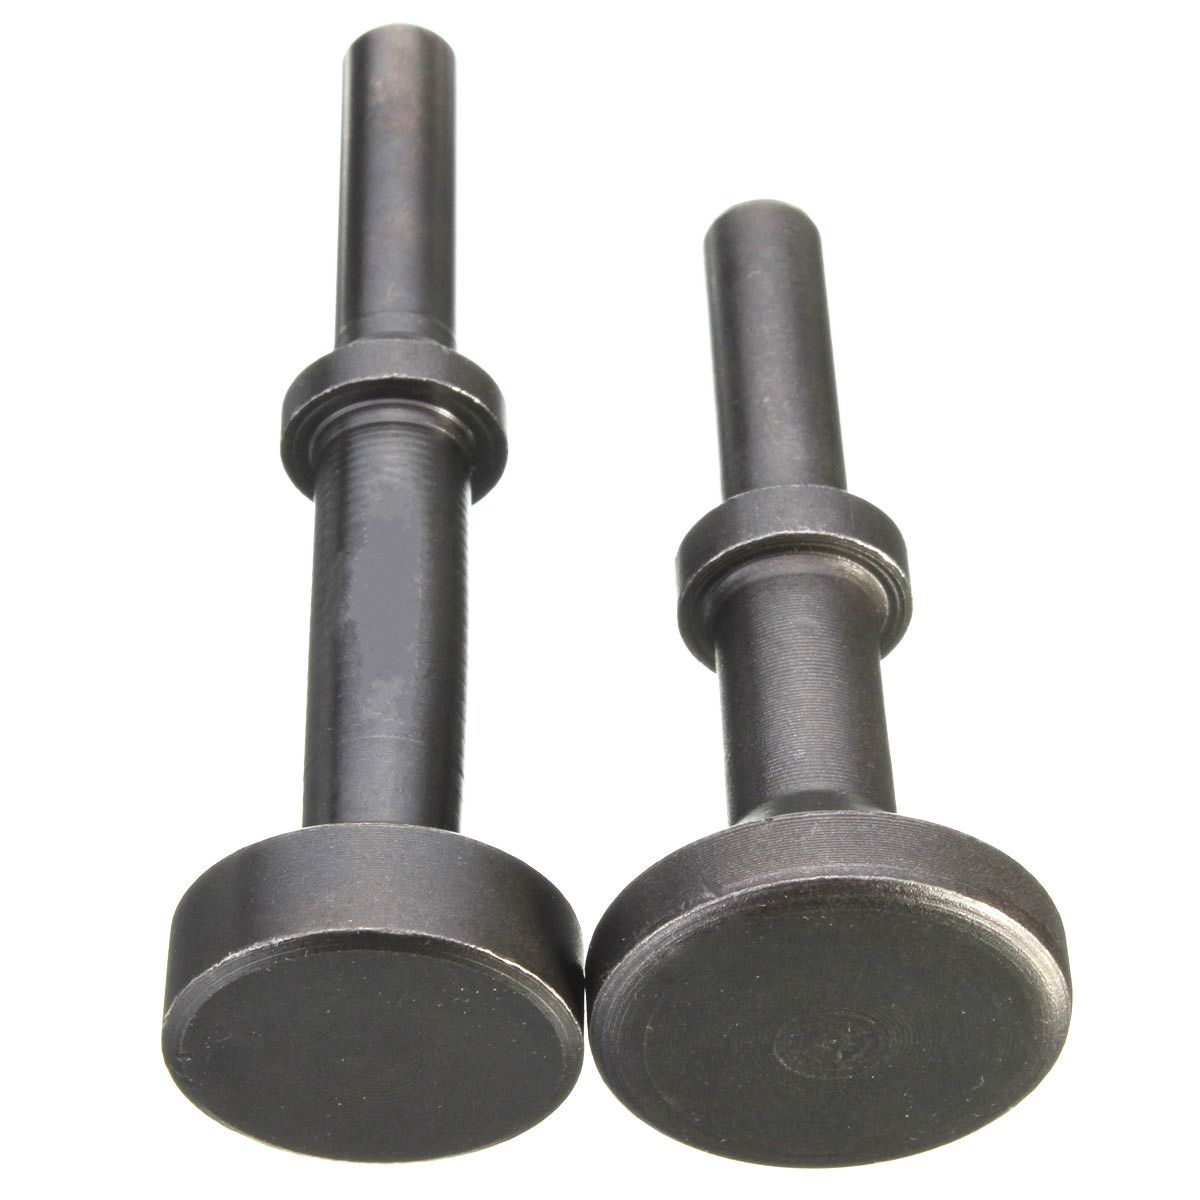 80mm100mm-Smoothing-Pneumatic-Drifts-Air-Hammers-Bit-Set-Extended-Length-Tool-1272253